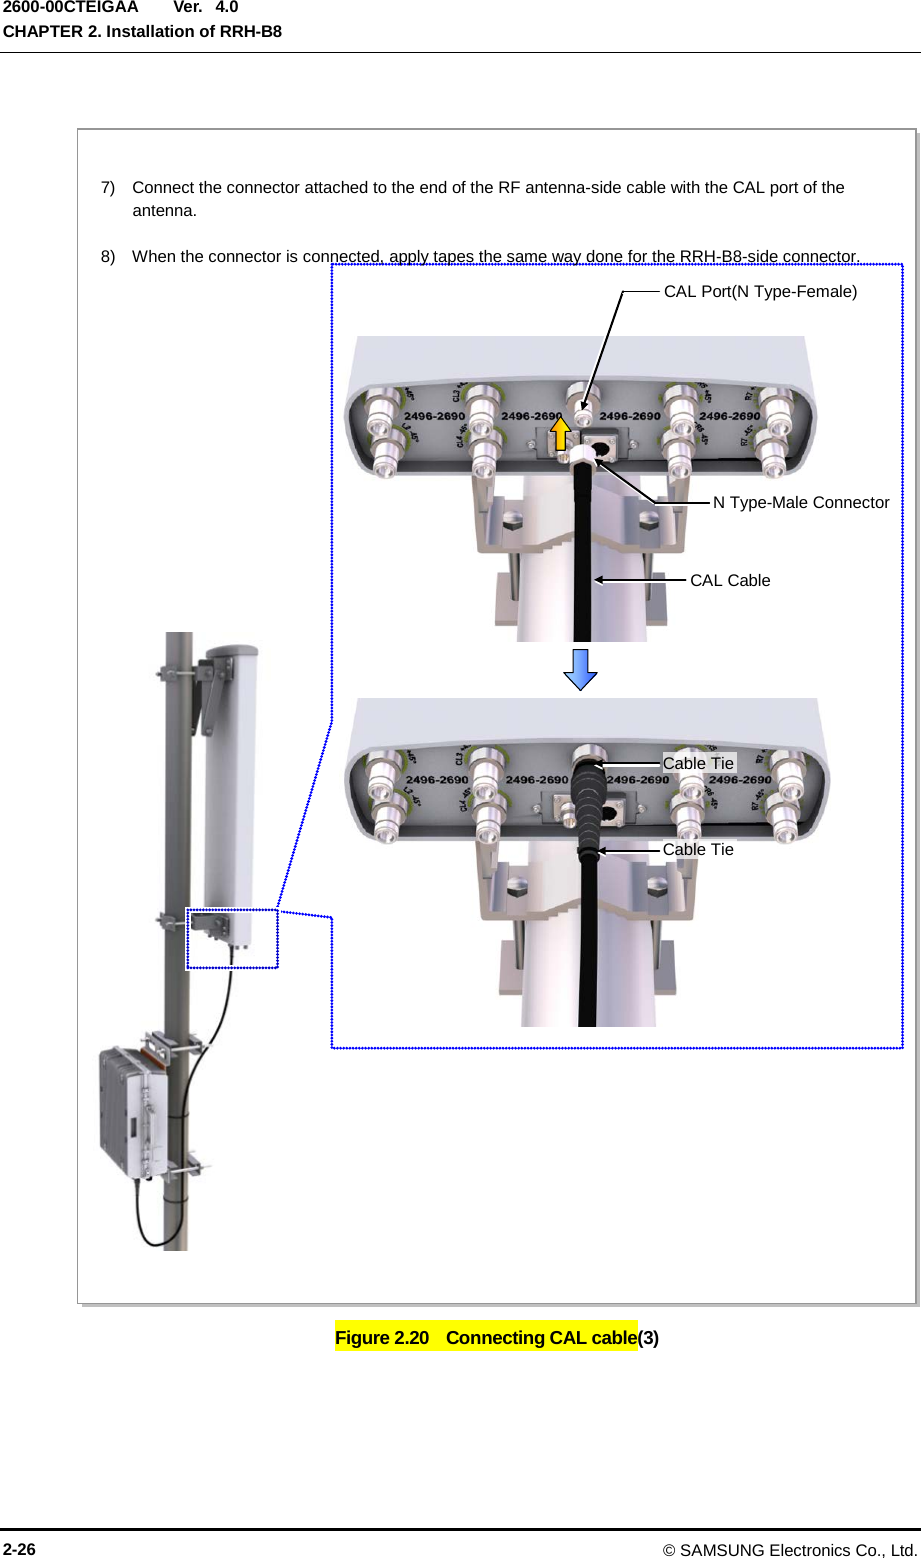  Ver.  CHAPTER 2. Installation of RRH-B8 2600-00CTEIGAA 4.0  Figure 2.20    Connecting CAL cable(3)   7)    Connect the connector attached to the end of the RF antenna-side cable with the CAL port of the antenna.  8)    When the connector is connected, apply tapes the same way done for the RRH-B8-side connector. CAL Port(N Type-Female) N Type-Male Connector CAL Cable Cable Tie Cable Tie 2-26 © SAMSUNG Electronics Co., Ltd. 